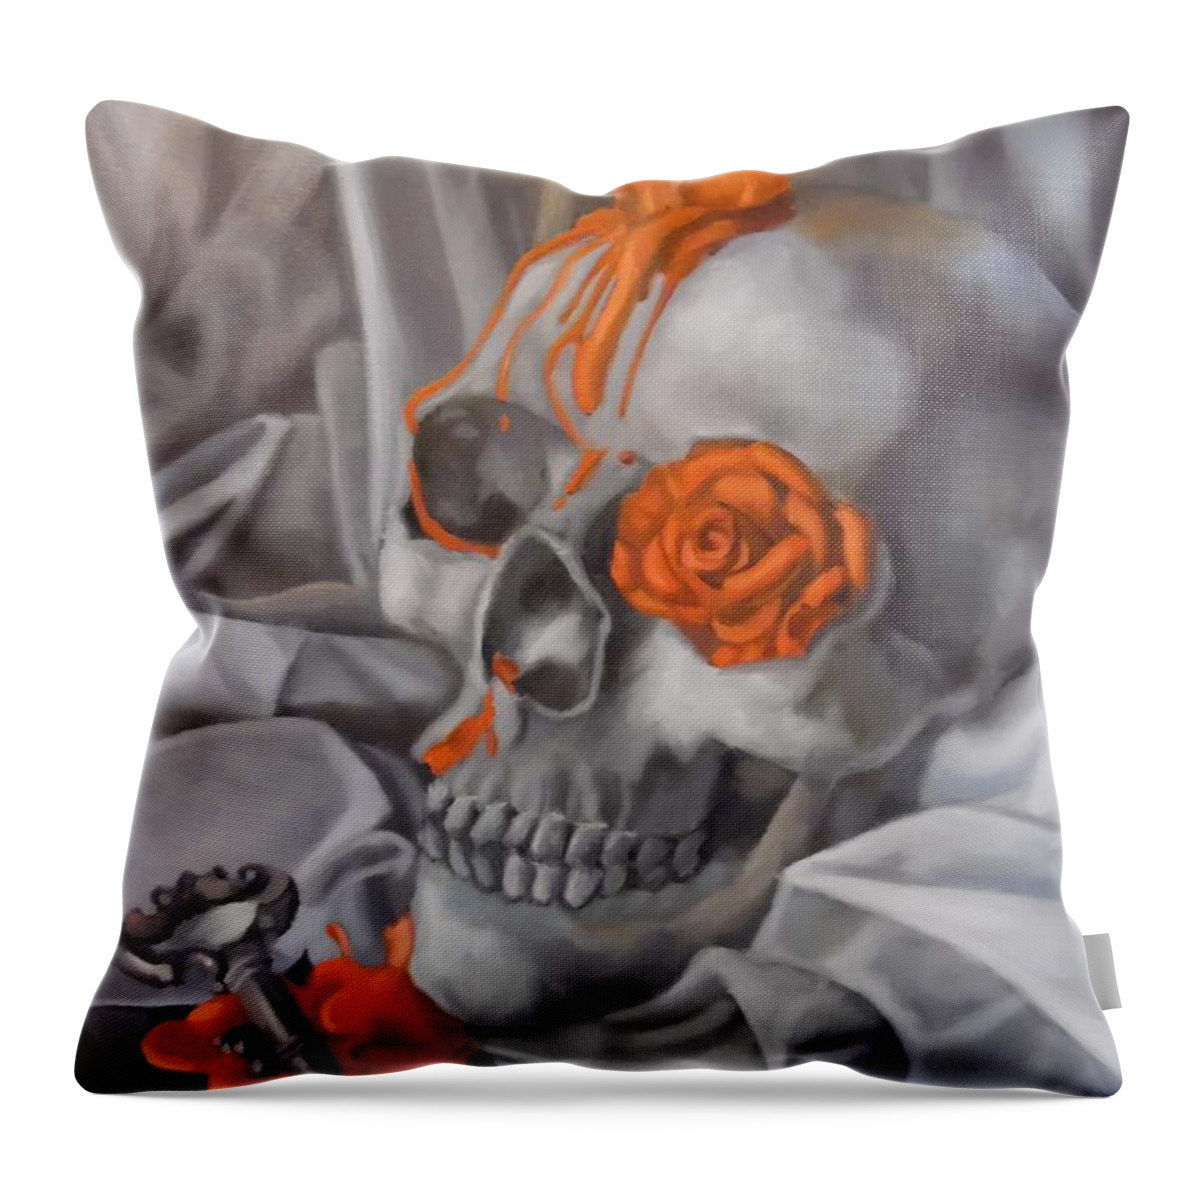 Skull Throw Pillow featuring the painting Dead Romance by Lori Keilwitz